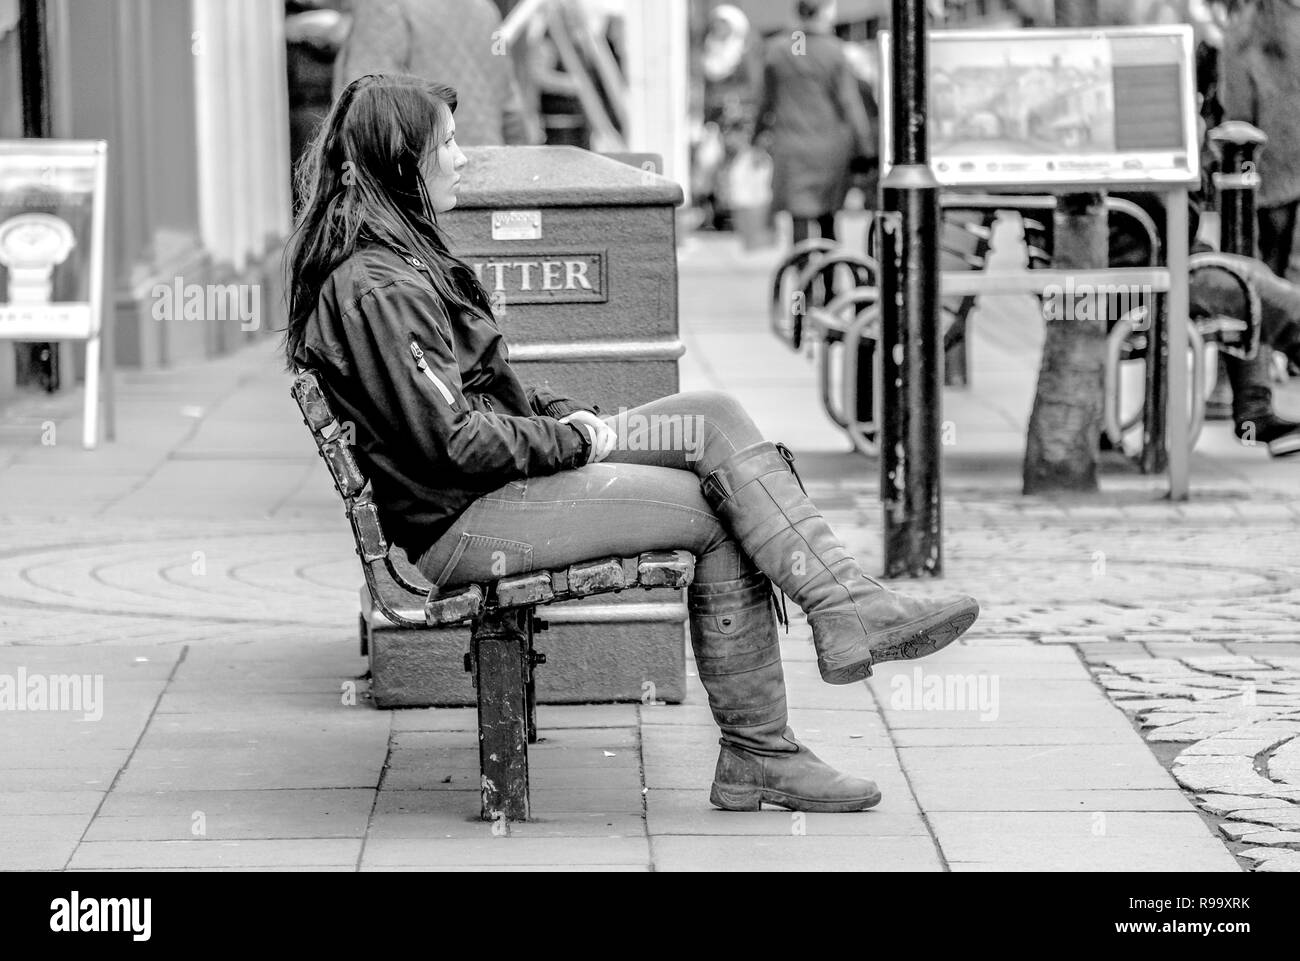 A young woman with long hair in leather jacket, boots and jeans waits on a bench within a pedestrianised urban town centre shopping area Stock Photo